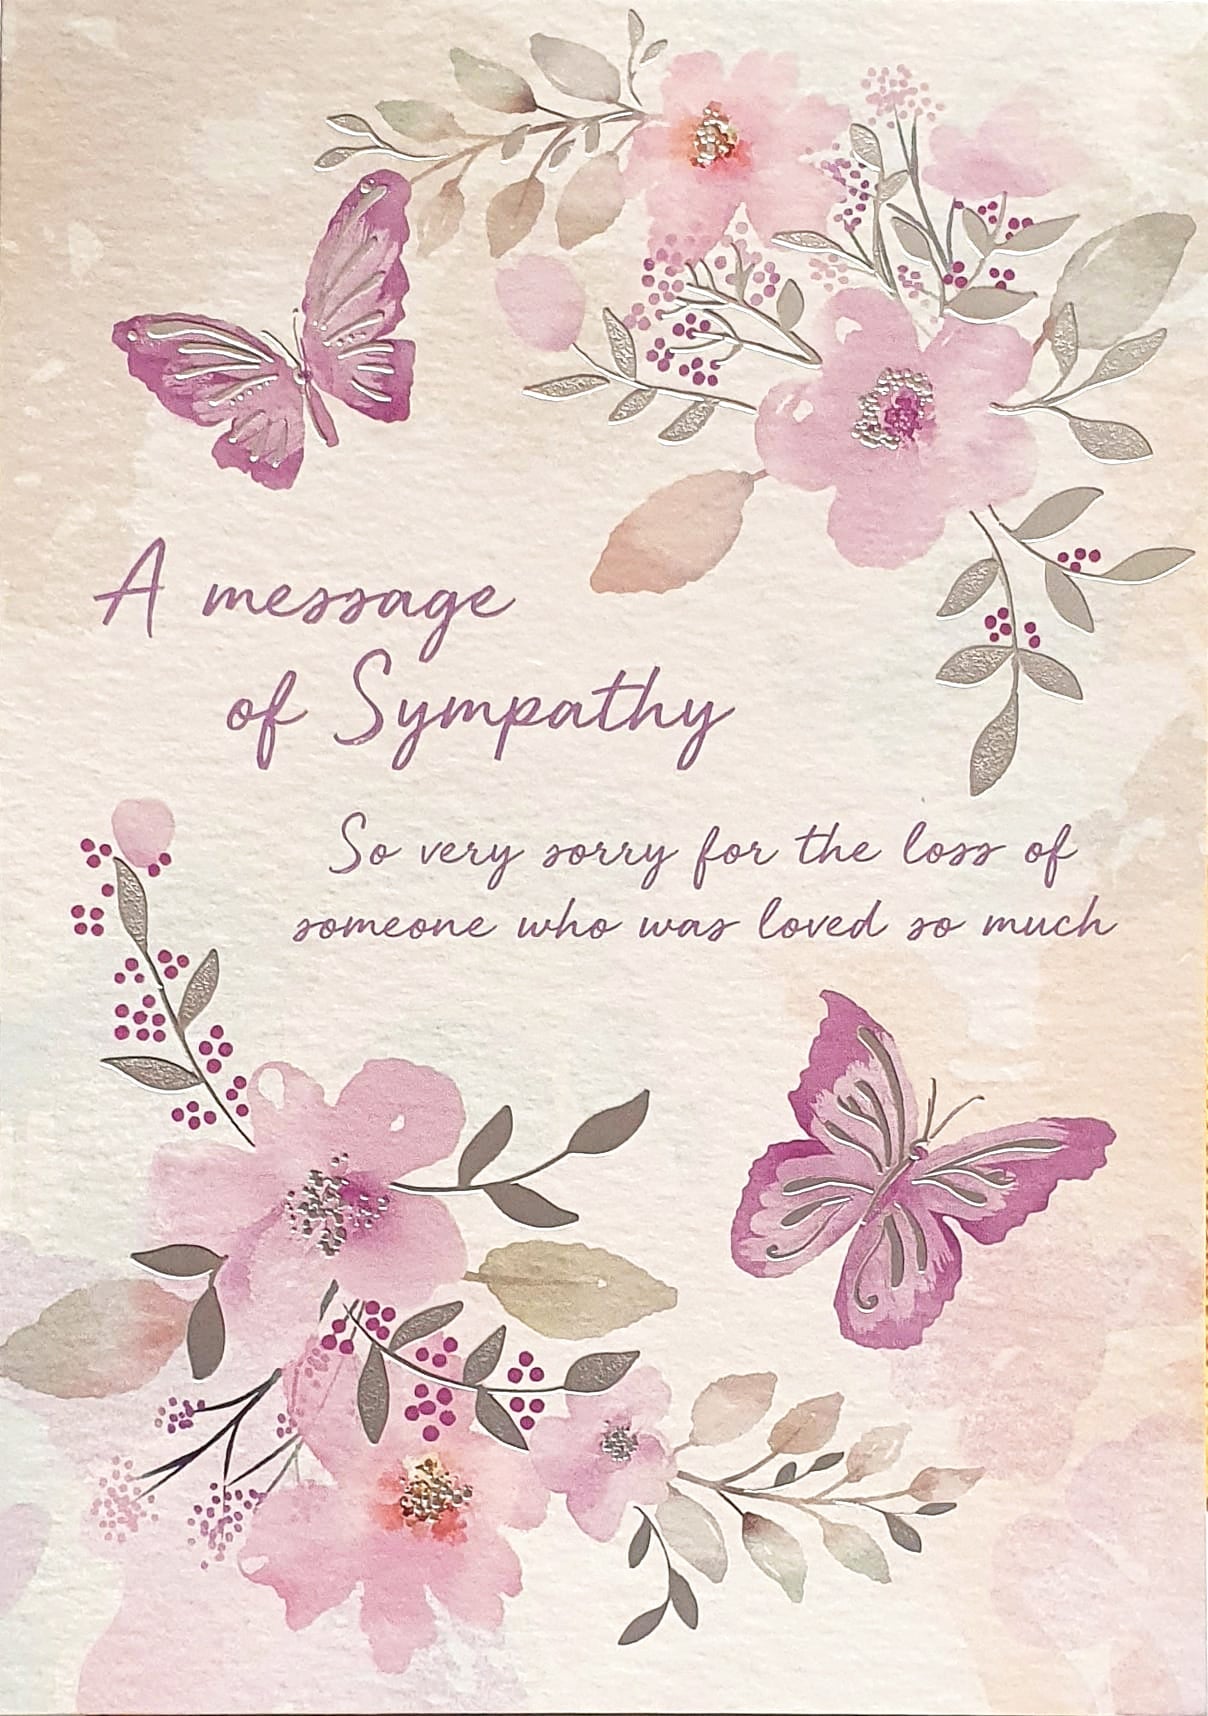 Sympathy Card - Loss Of Loved One